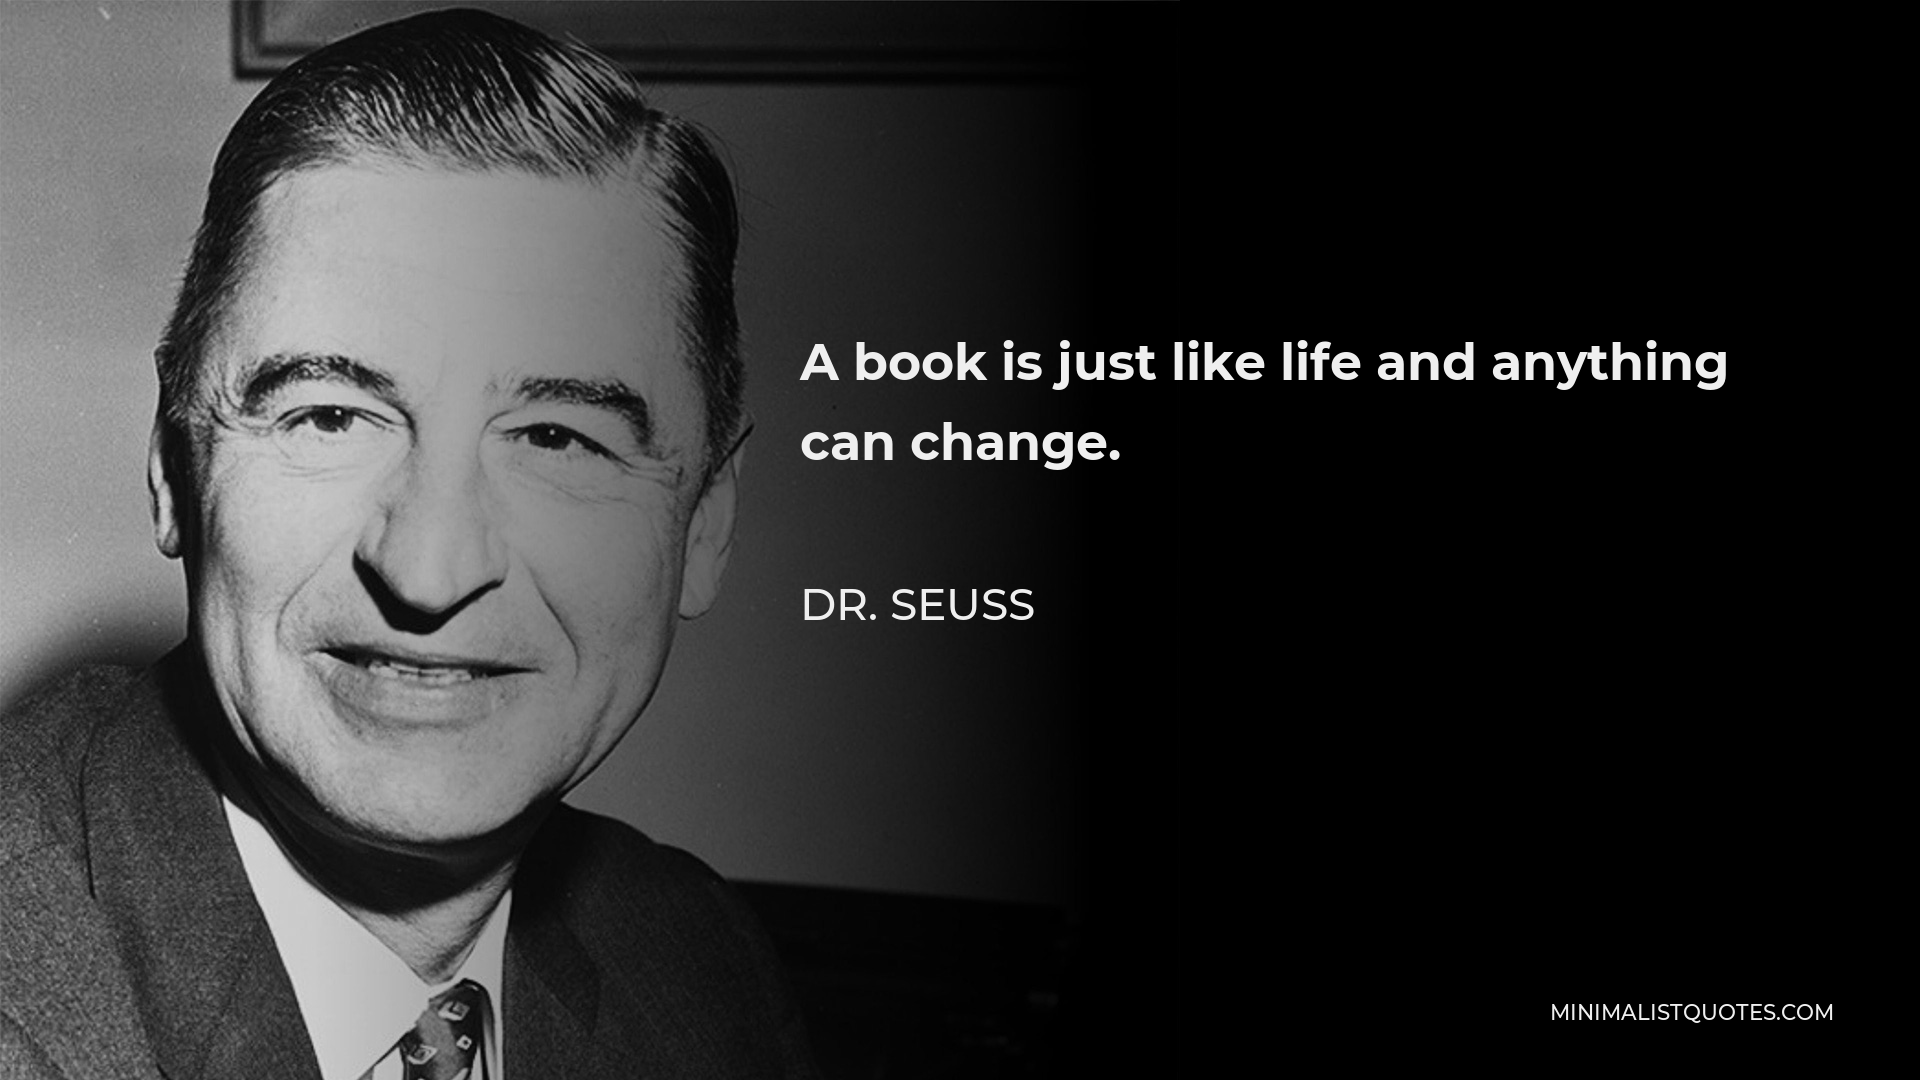 Dr. Seuss Quote - A book is just like life and anything can change.